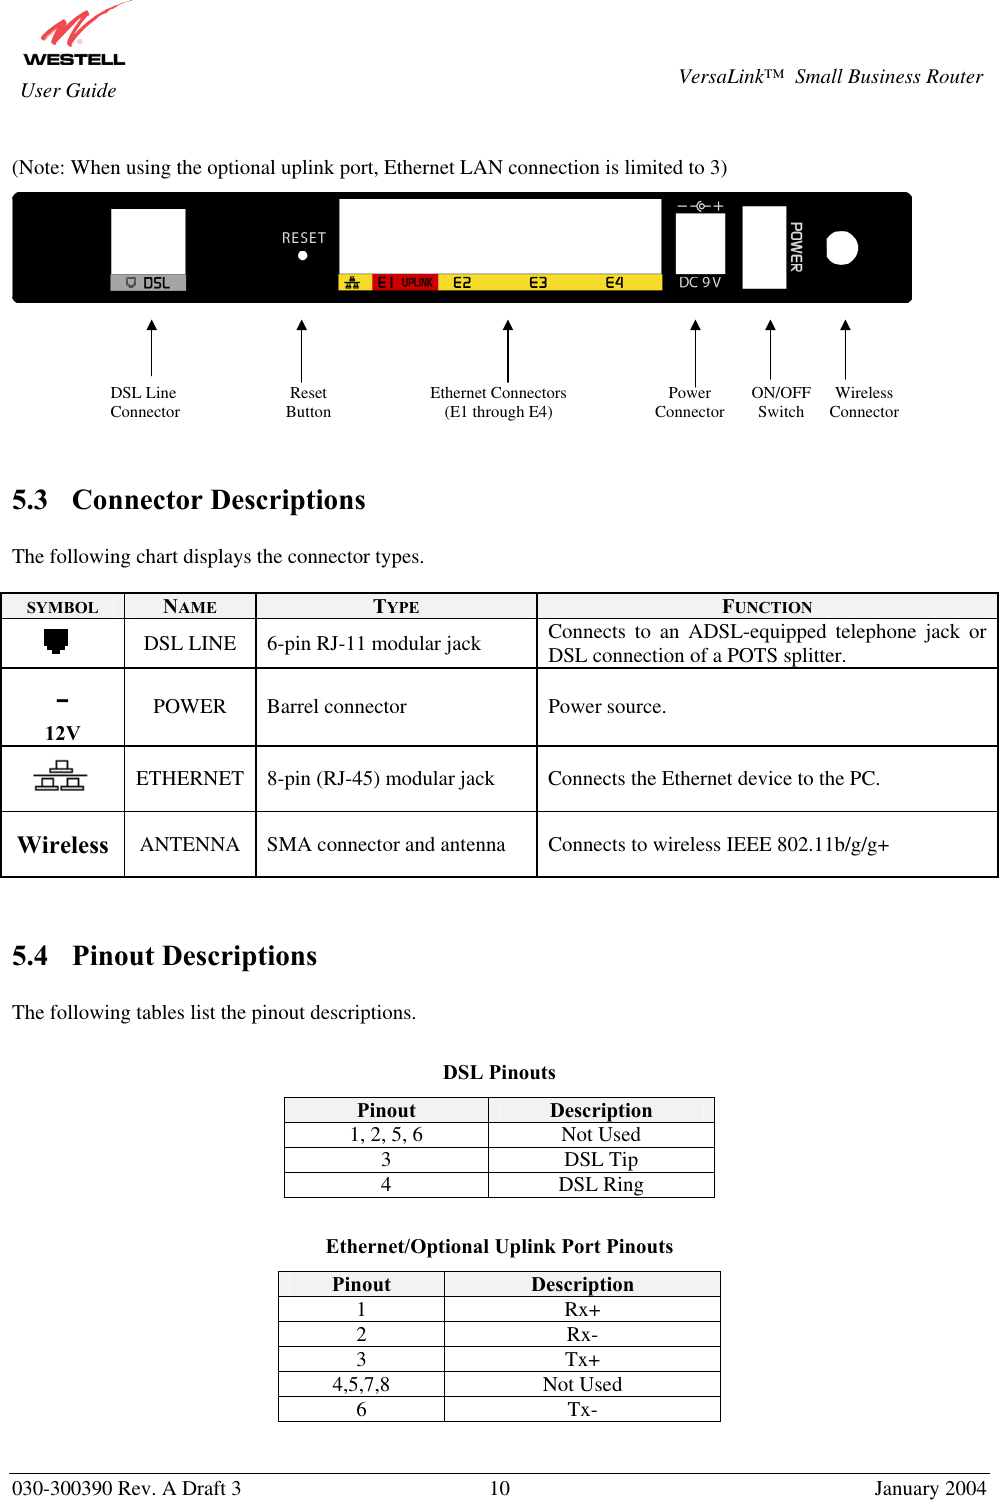       030-300390 Rev. A Draft 3  10  January 2004  VersaLink™  Small Business Router  User Guide  (Note: When using the optional uplink port, Ethernet LAN connection is limited to 3)         5.3 Connector Descriptions  The following chart displays the connector types.   SYMBOL  NAME  TYPE  FUNCTION  DSL LINE  6-pin RJ-11 modular jack  Connects to an ADSL-equipped telephone jack or DSL connection of a POTS splitter. - 12V POWER  Barrel connector  Power source.  ETHERNET  8-pin (RJ-45) modular jack  Connects the Ethernet device to the PC. Wireless  ANTENNA  SMA connector and antenna  Connects to wireless IEEE 802.11b/g/g+   5.4 Pinout Descriptions  The following tables list the pinout descriptions.   DSL Pinouts Pinout  Description 1, 2, 5, 6  Not Used 3 DSL Tip 4 DSL Ring  Ethernet/Optional Uplink Port Pinouts Pinout  Description 1 Rx+ 2 Rx- 3 Tx+ 4,5,7,8 Not Used 6 Tx-   DSL Line Connector ON/OFF Switch PowerConnectorEthernet Connectors(E1 through E4)Reset ButtonWirelessConnector